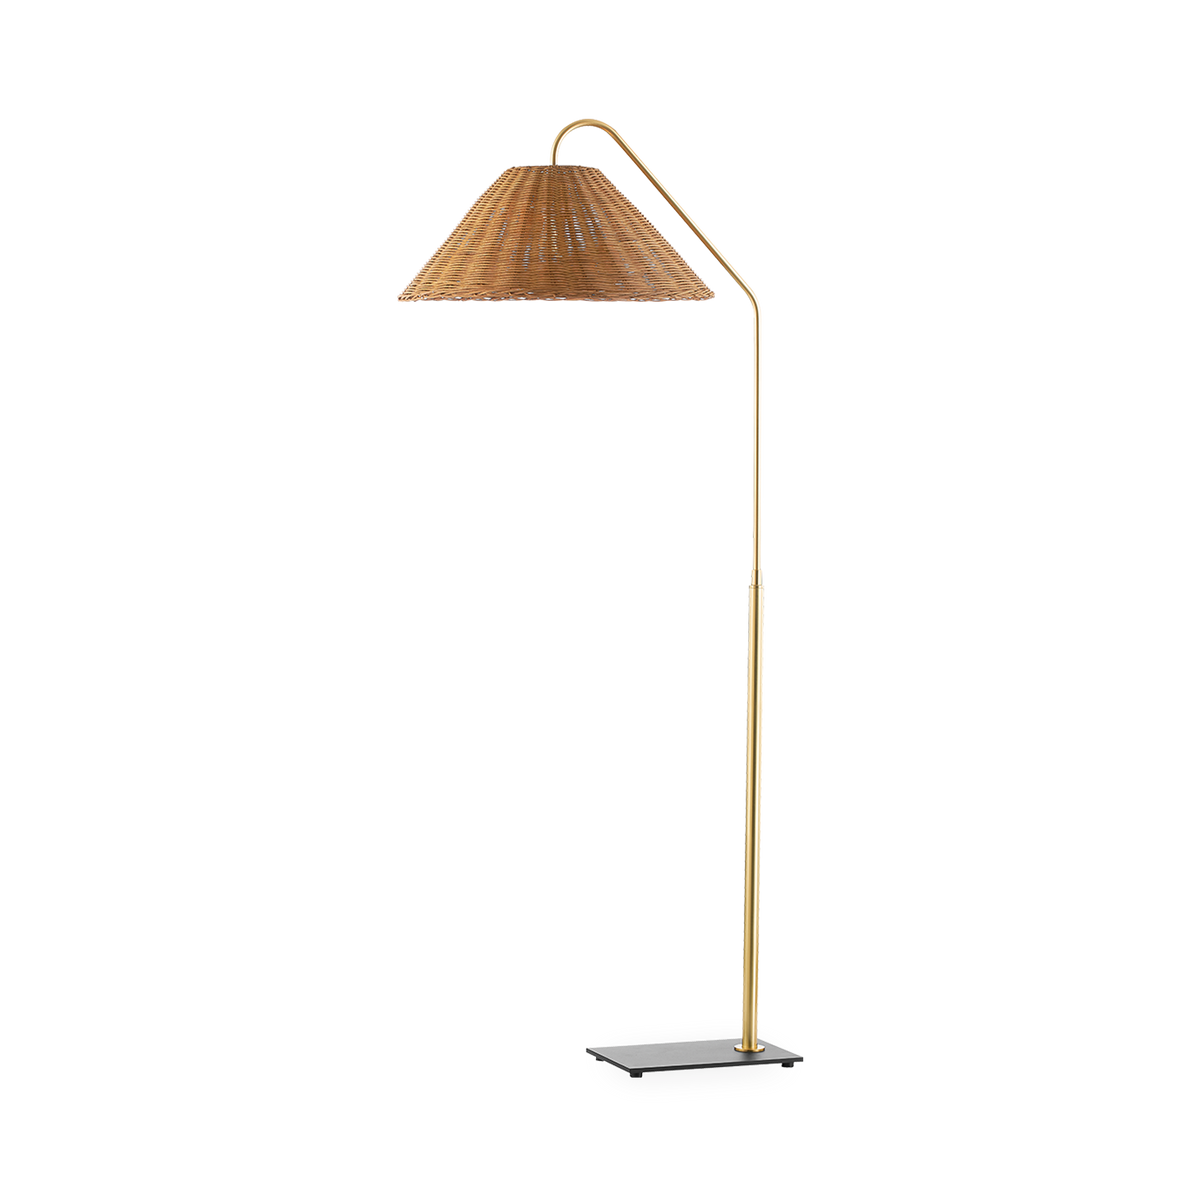 The Lauren Floor Light keeps things easy and natural.